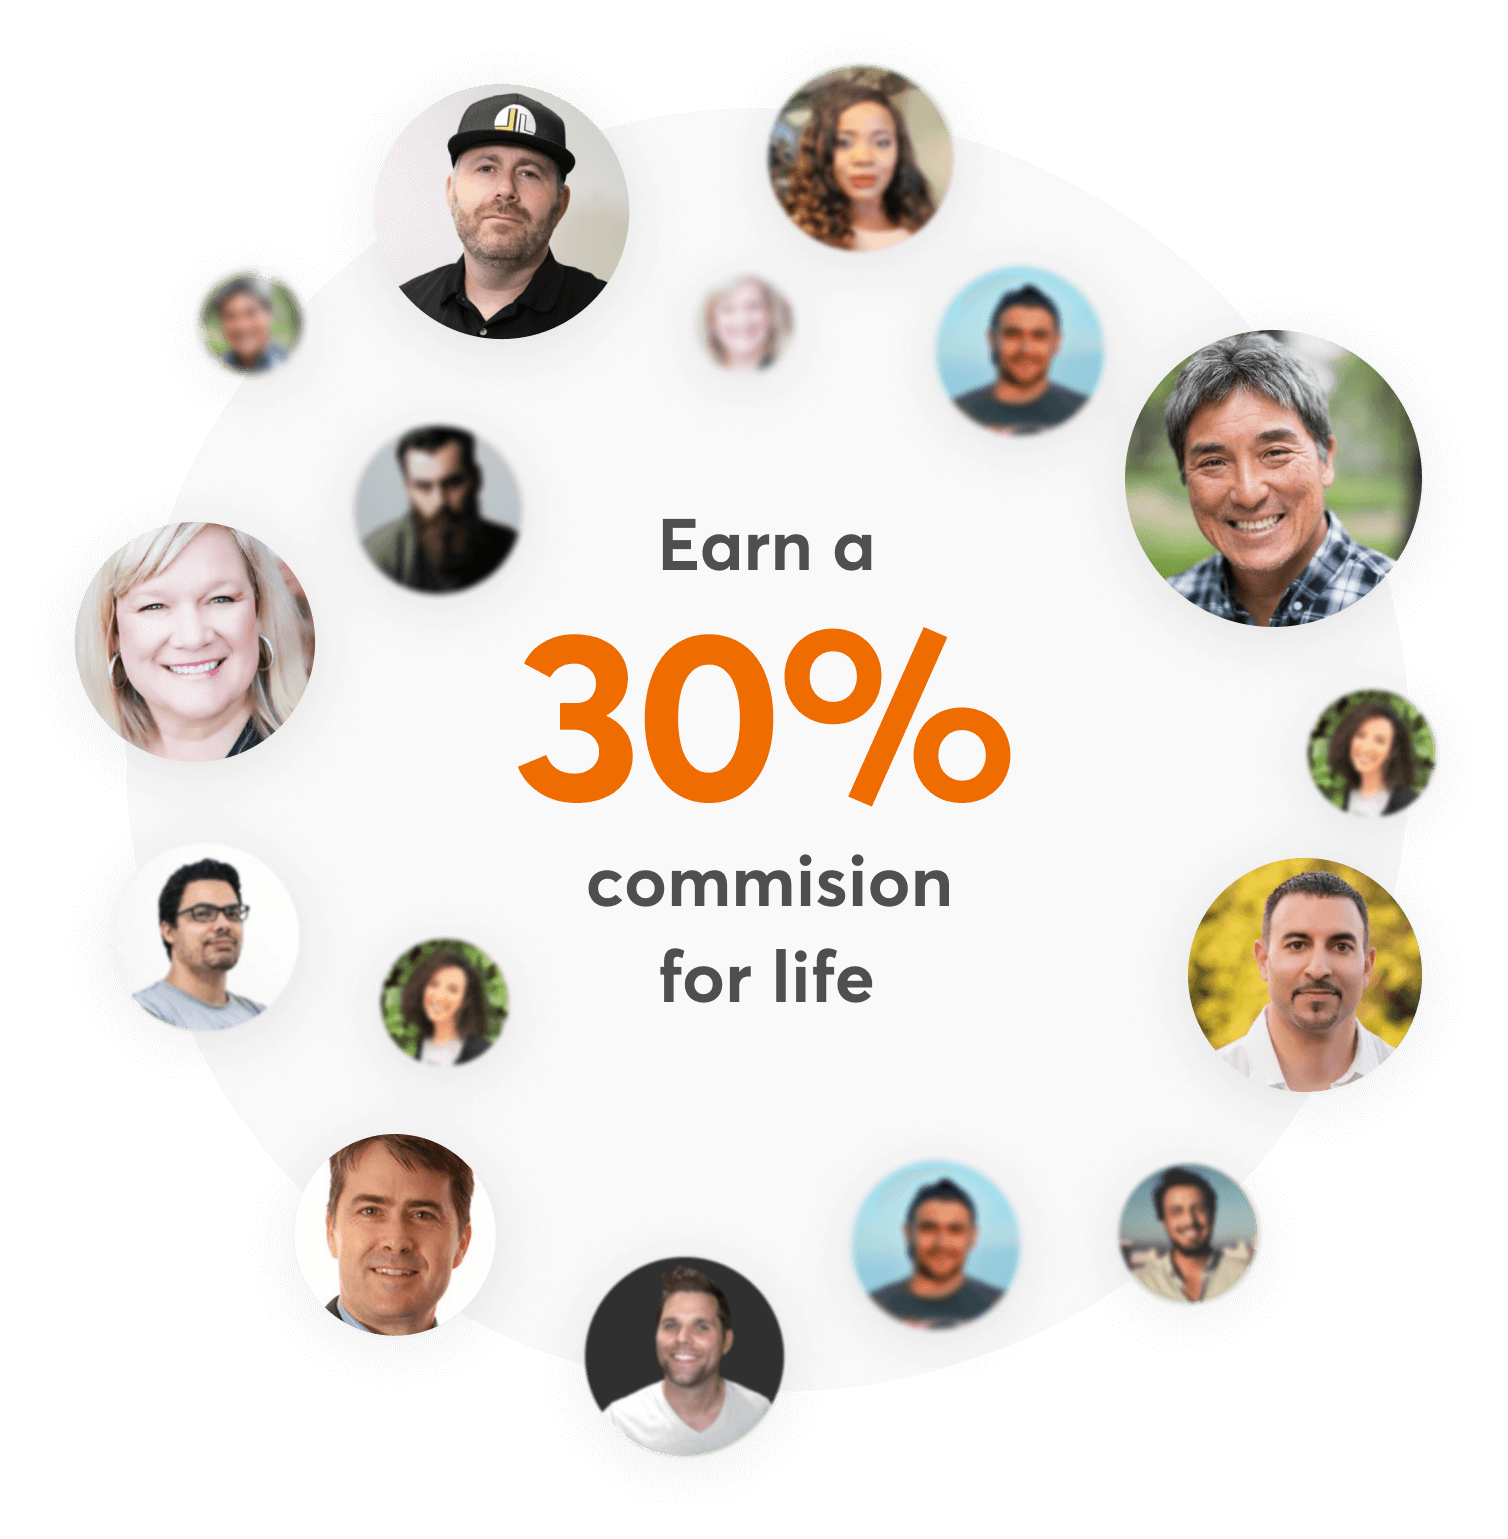 Find new customers through affiliate connections and earn a 30% commission for life.